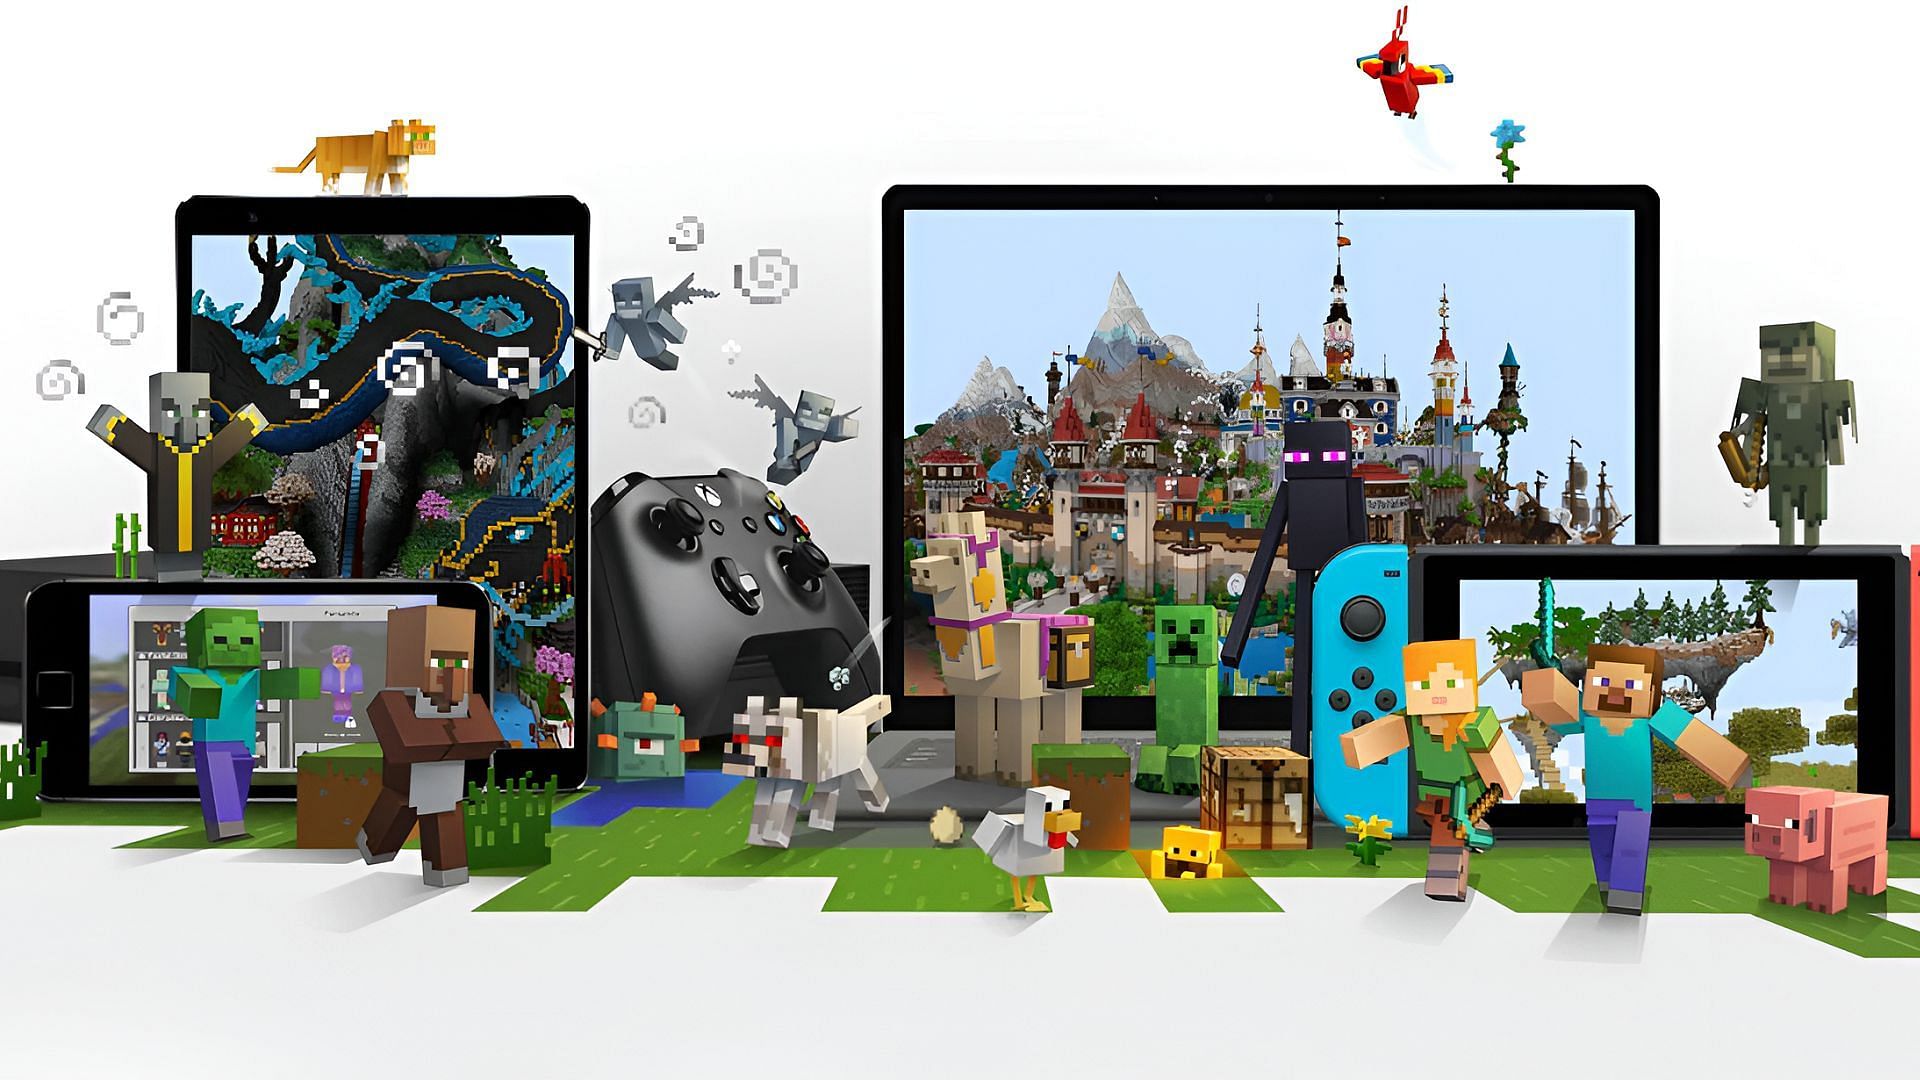 Minecraft can be played across multiple platforms.